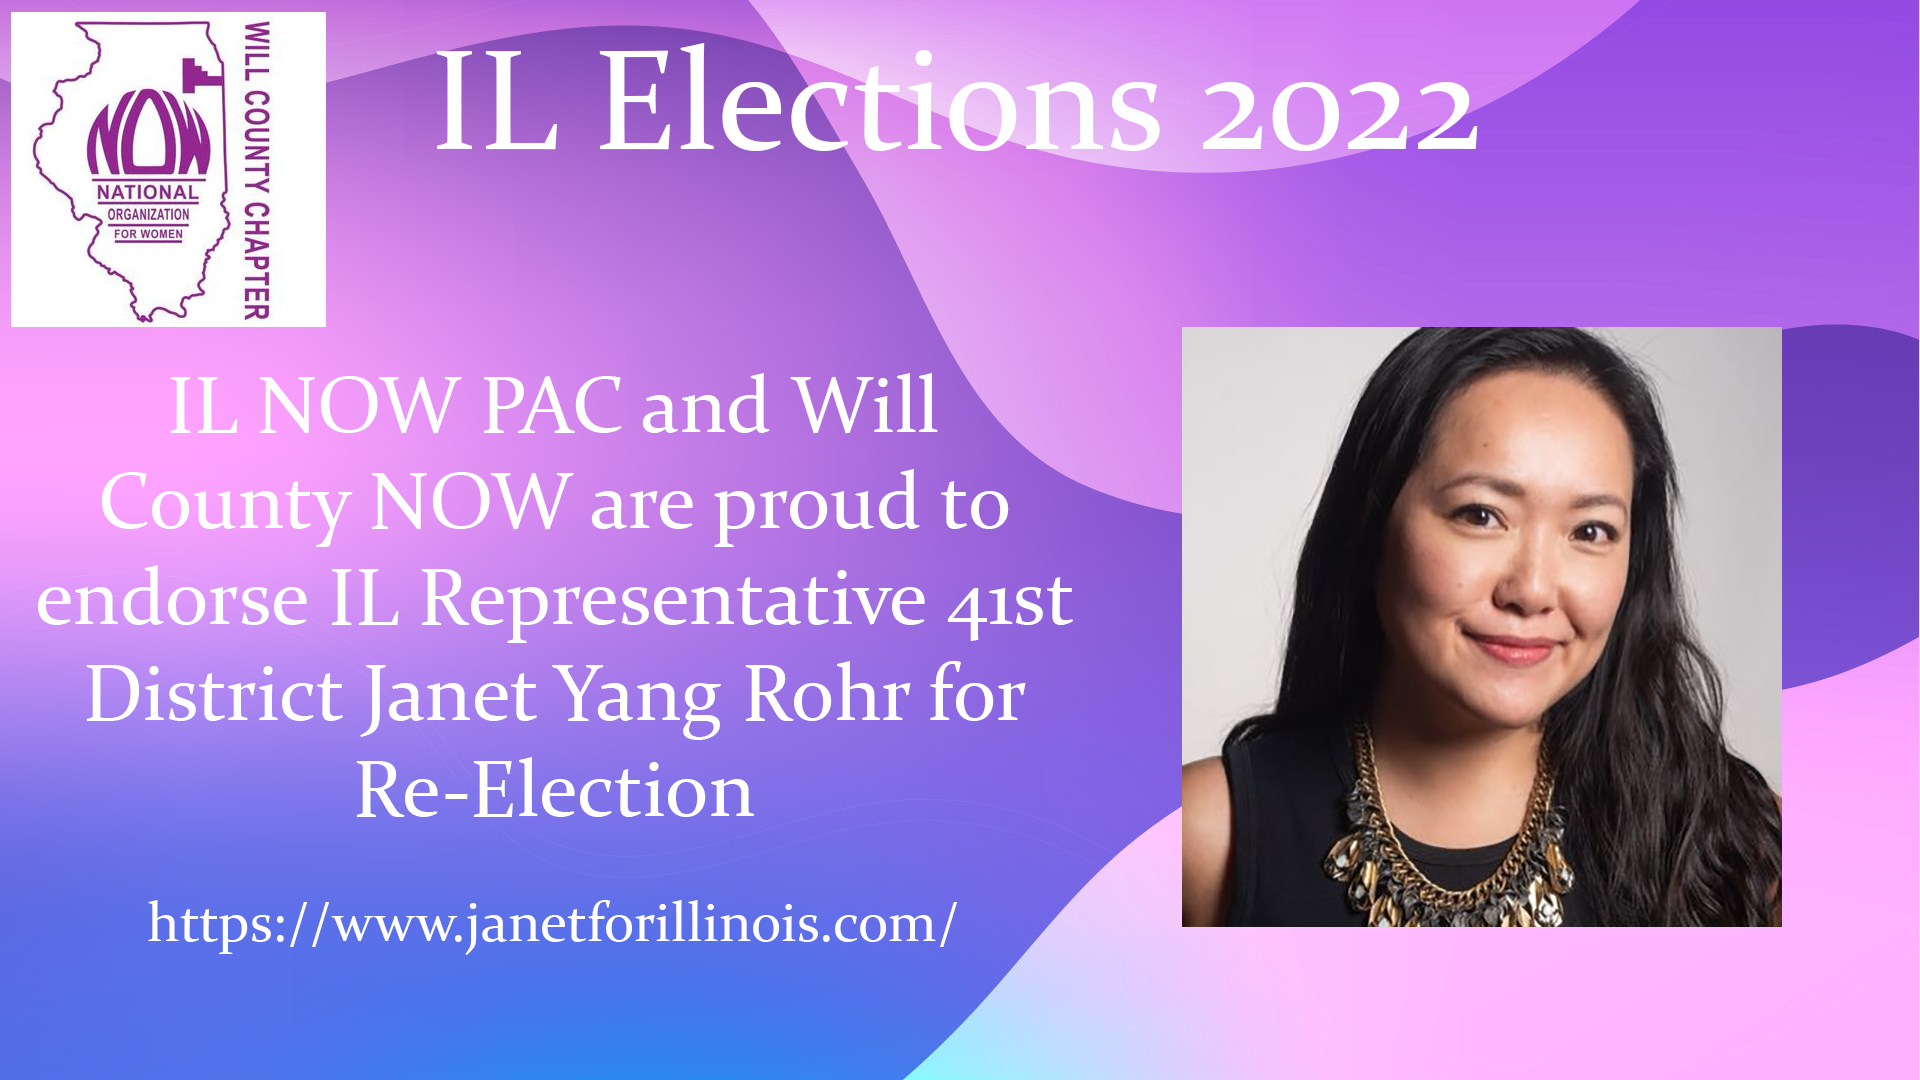 Will County NOW Endorses IL Representative 41st District Janet Yang Rohr for Re-Election